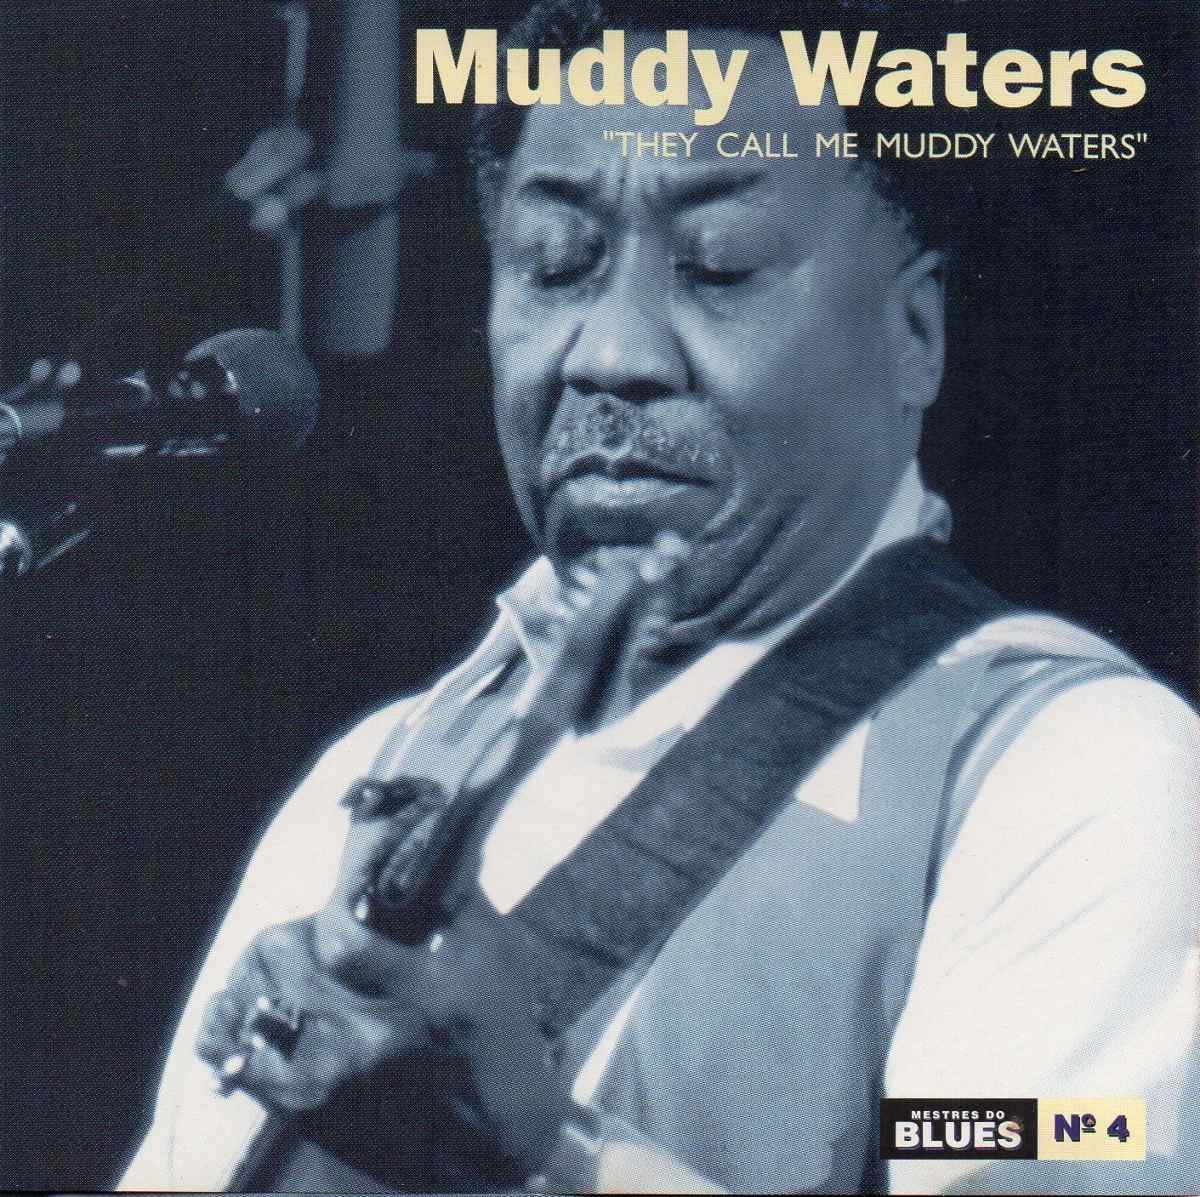 CD - Muddy Waters - they Call me Muddy Waters